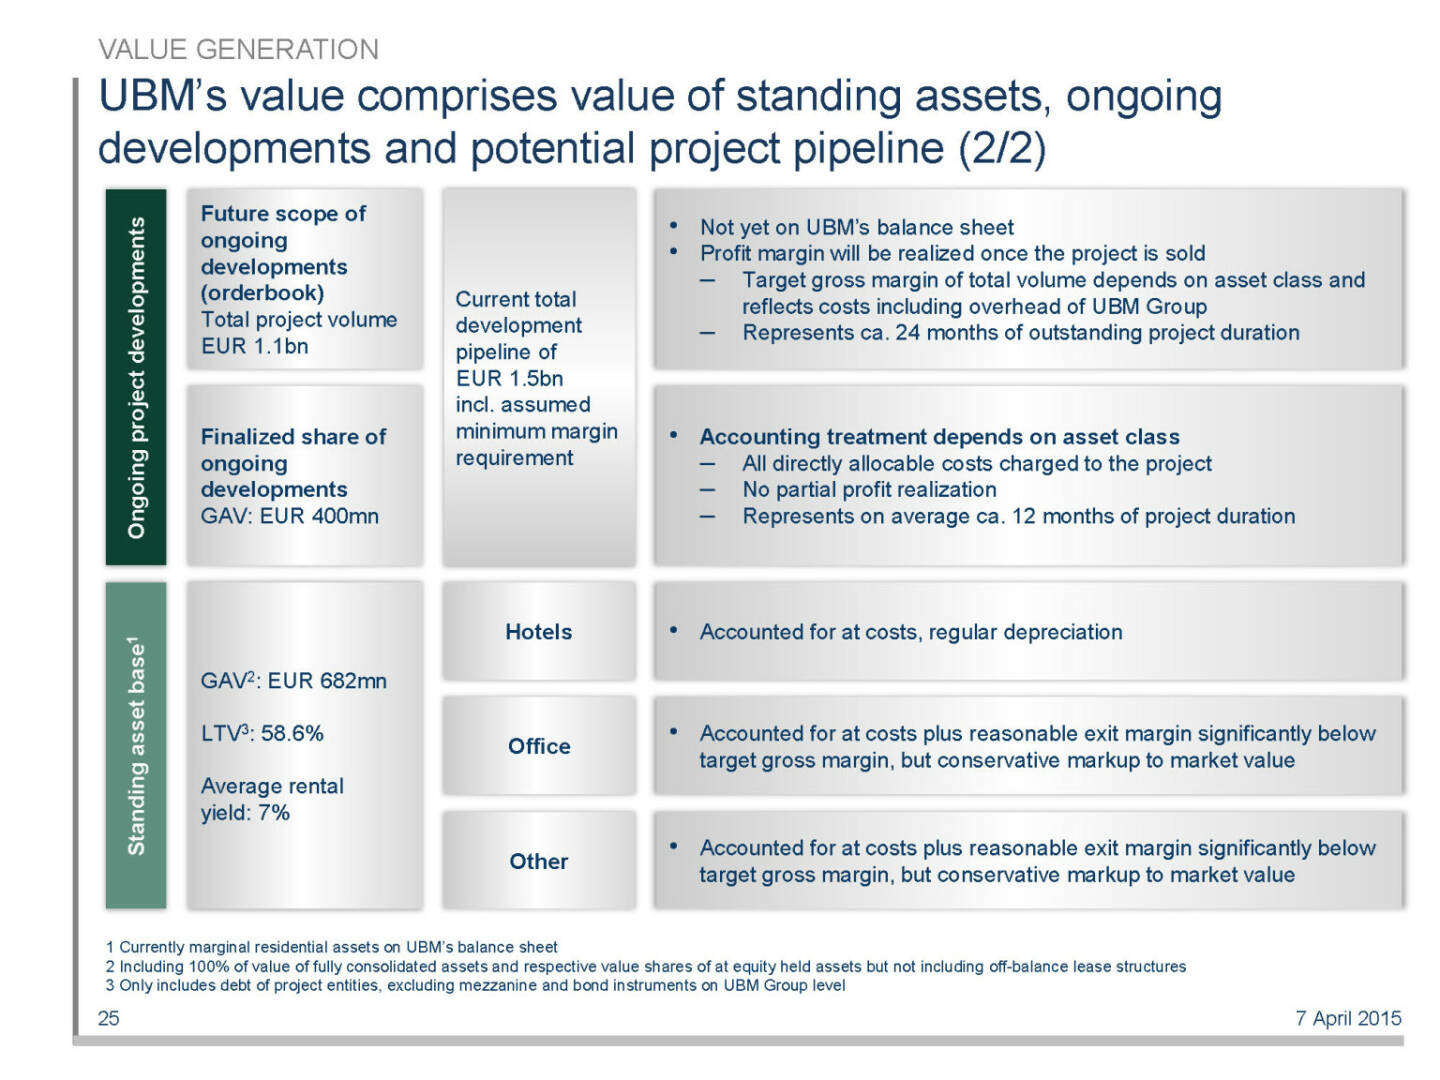 UBM’s value comprises value of standing assets, ongoing developments and potential project pipeline (2/2)